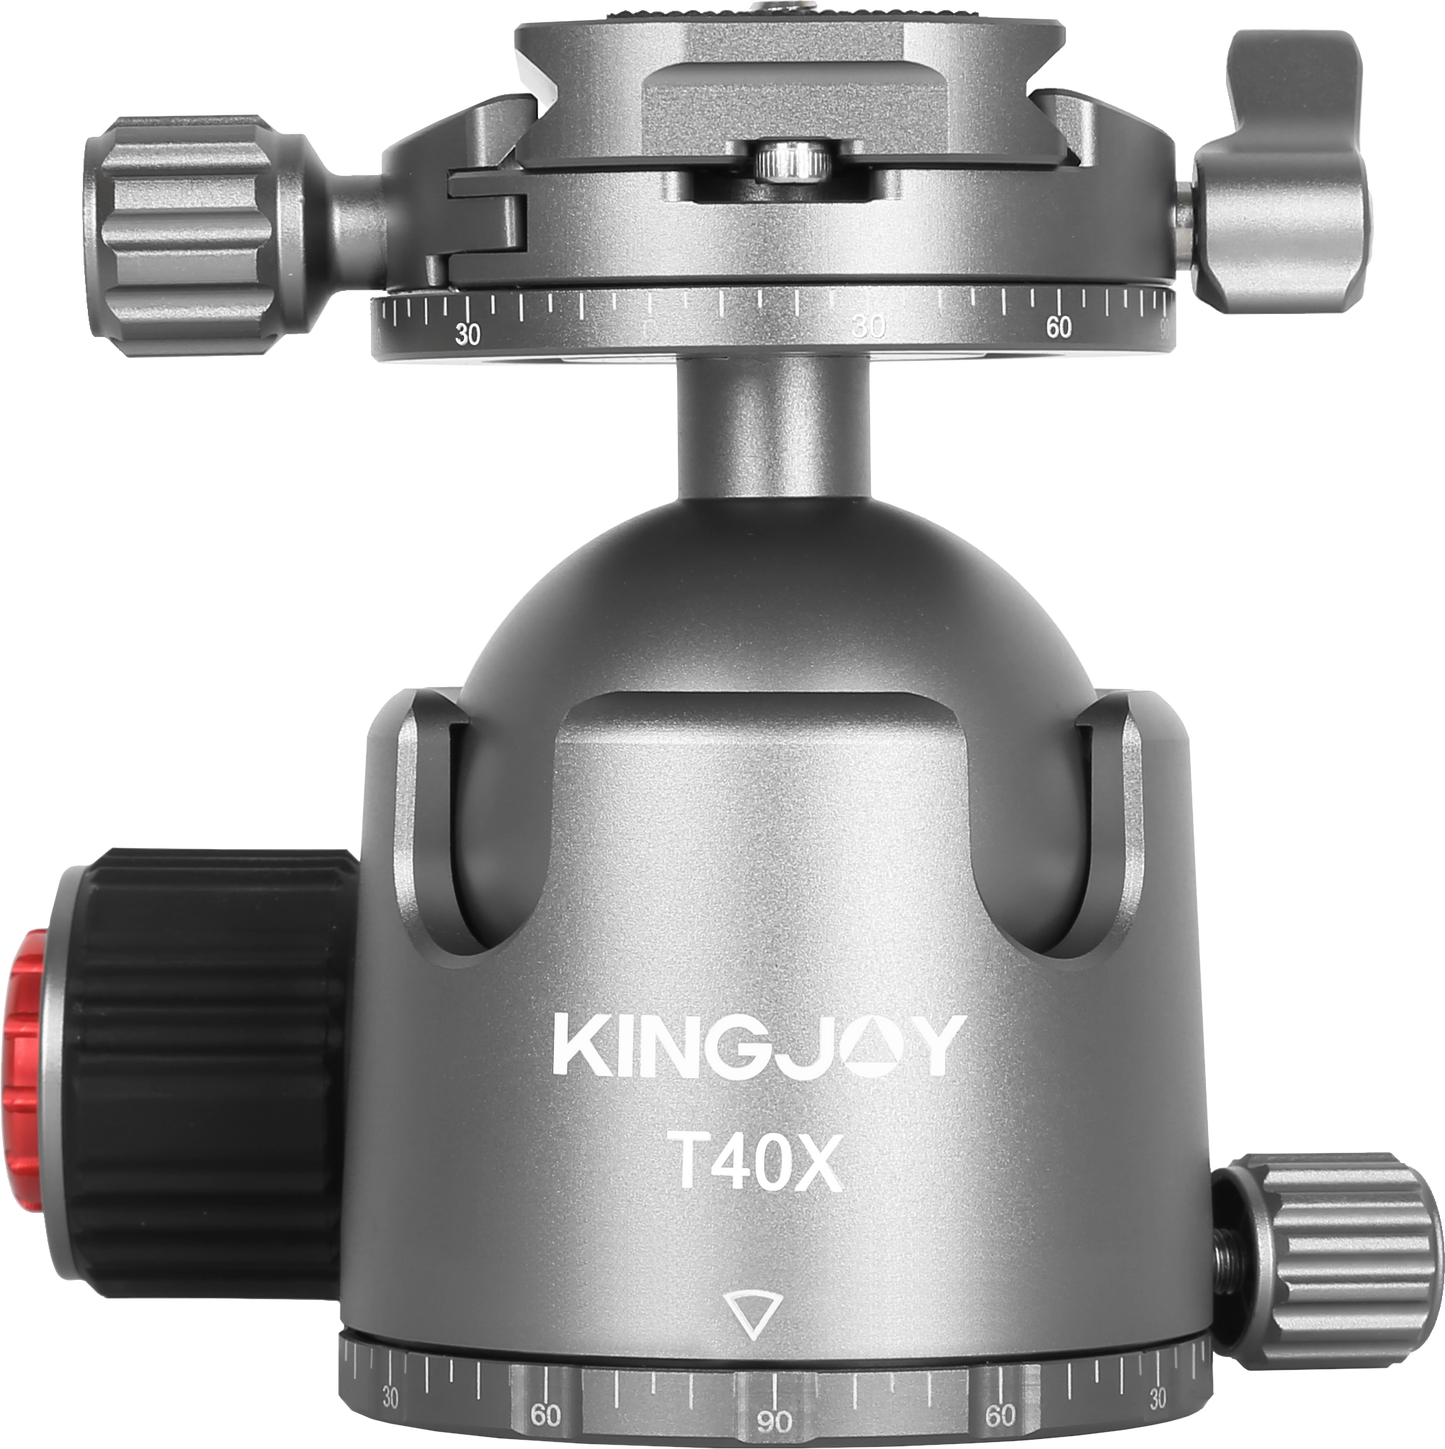 Kingjoy T40X professional double panoramic low center of gravity aluminum alloy camera ball head, 1.2lbs, ball dia 1.97in, base dia 2.48in